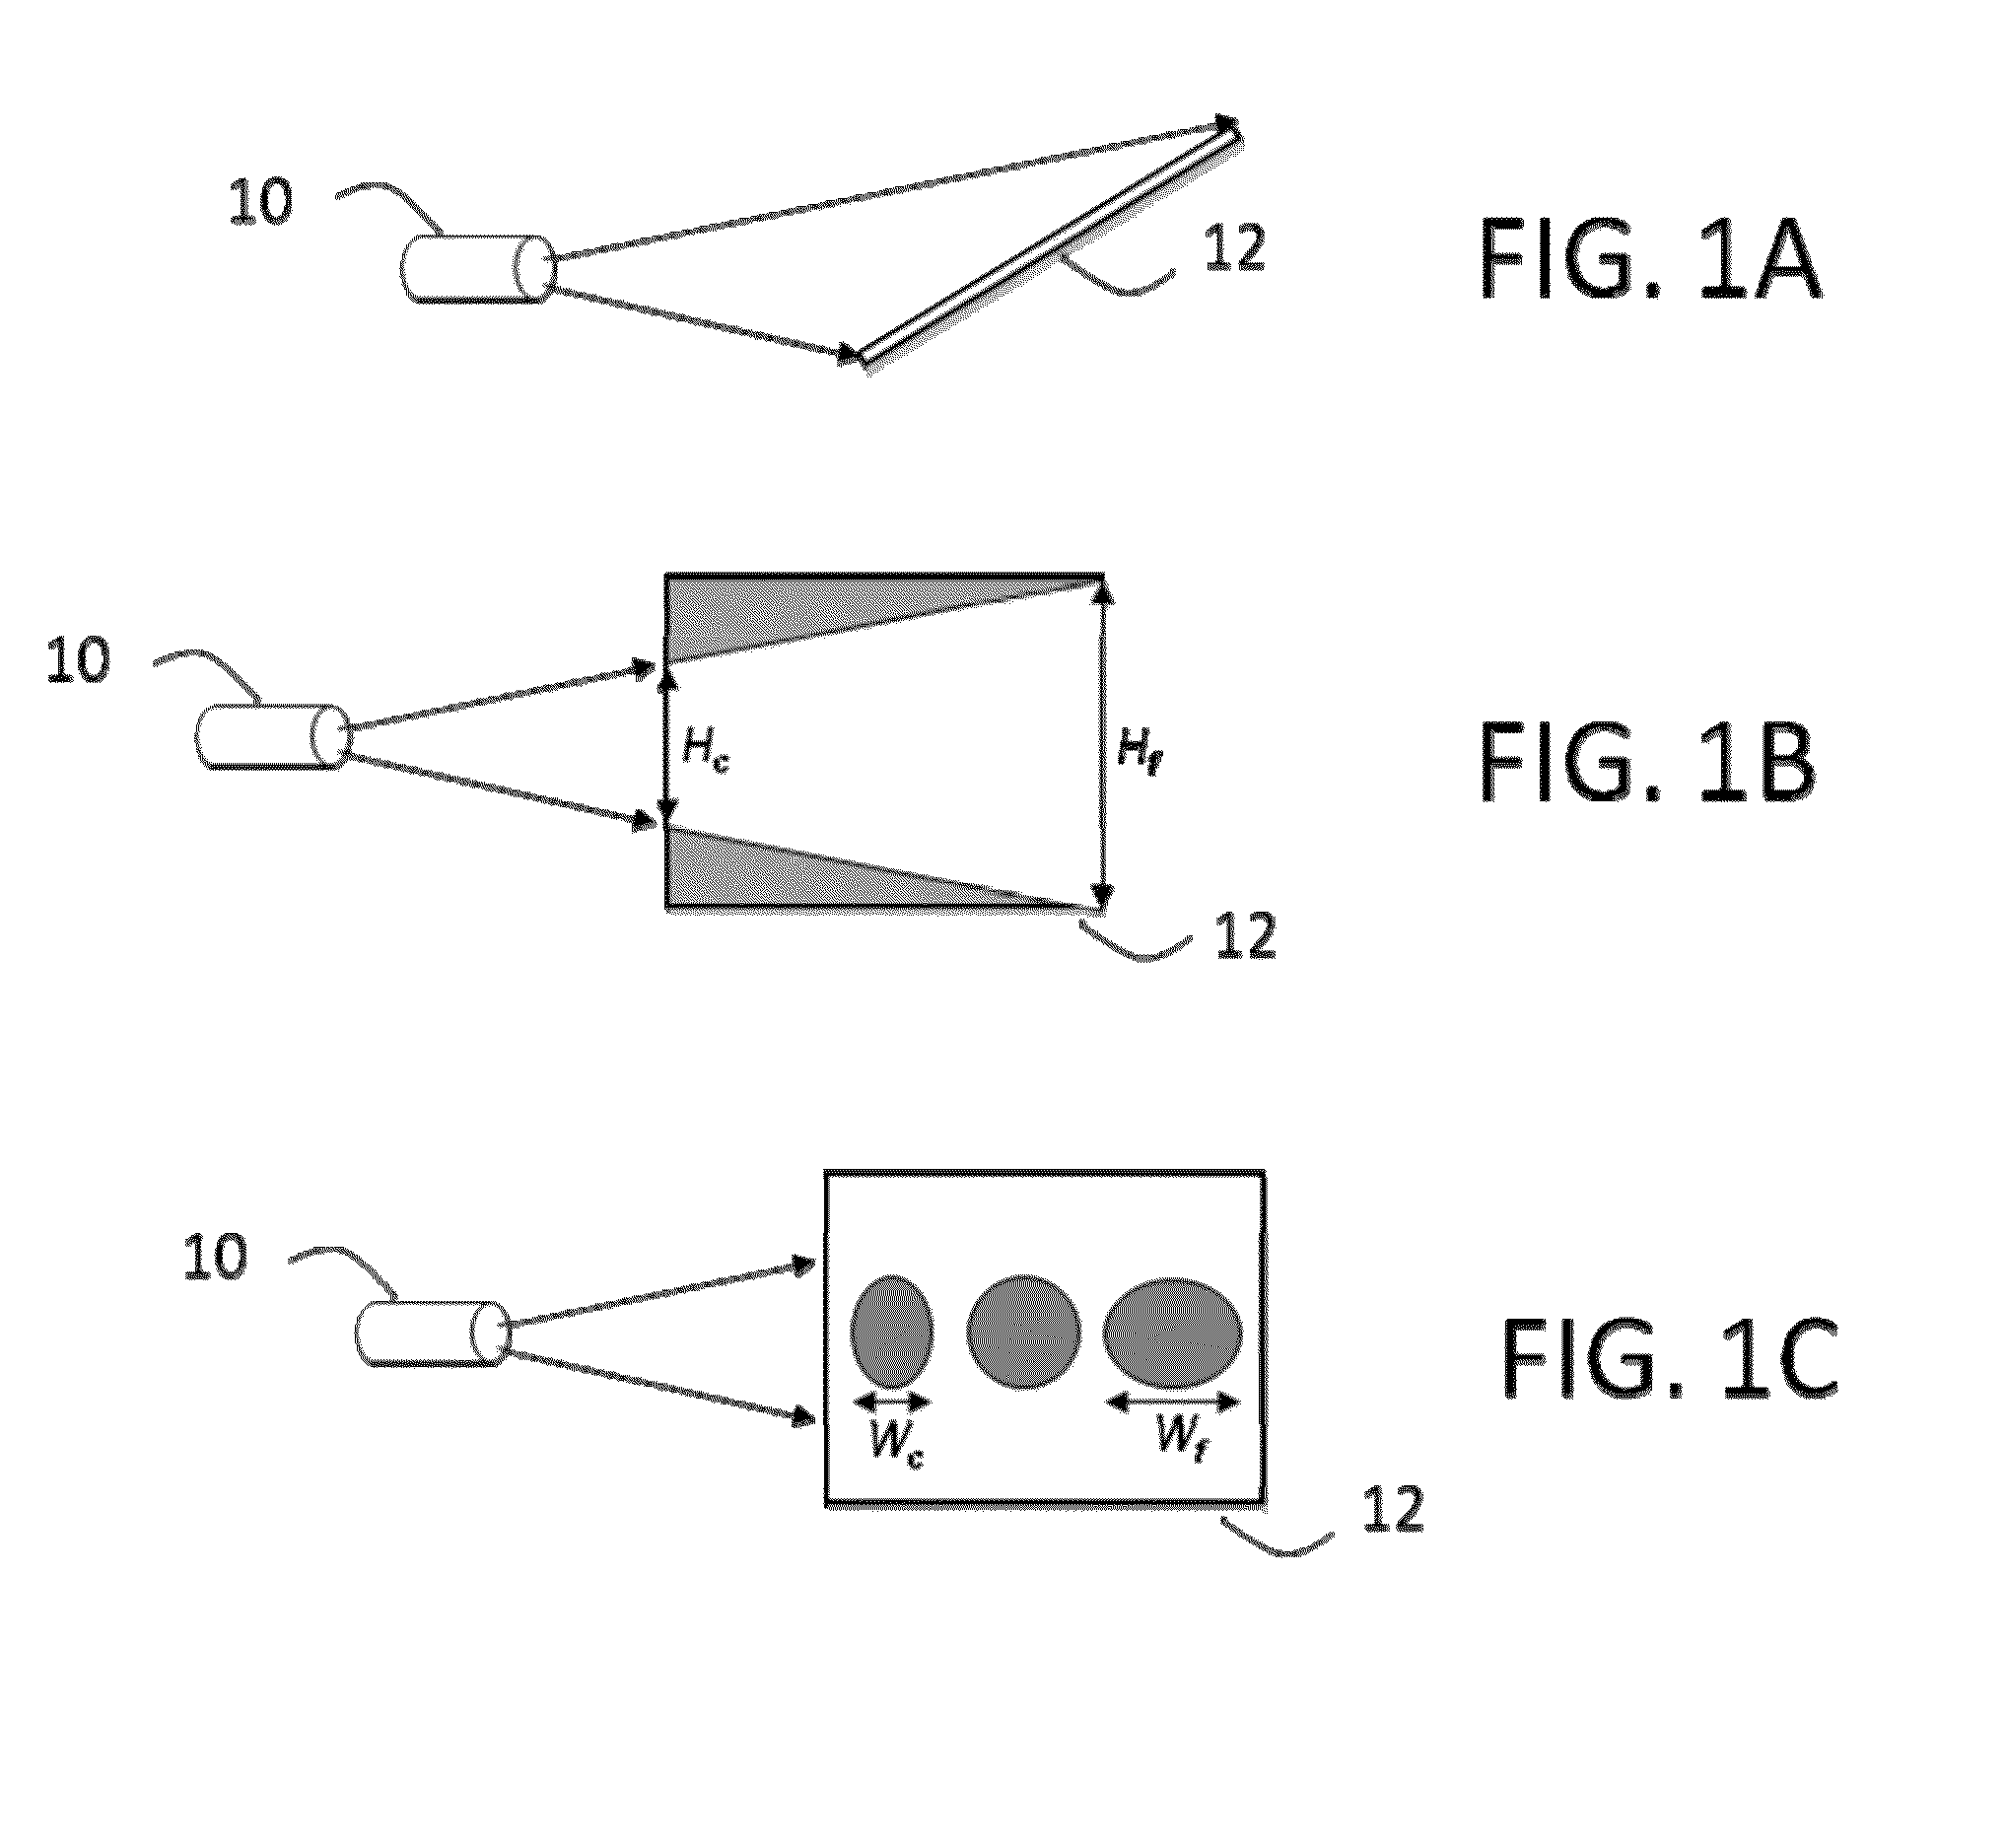 Illumination systems for reflective displays